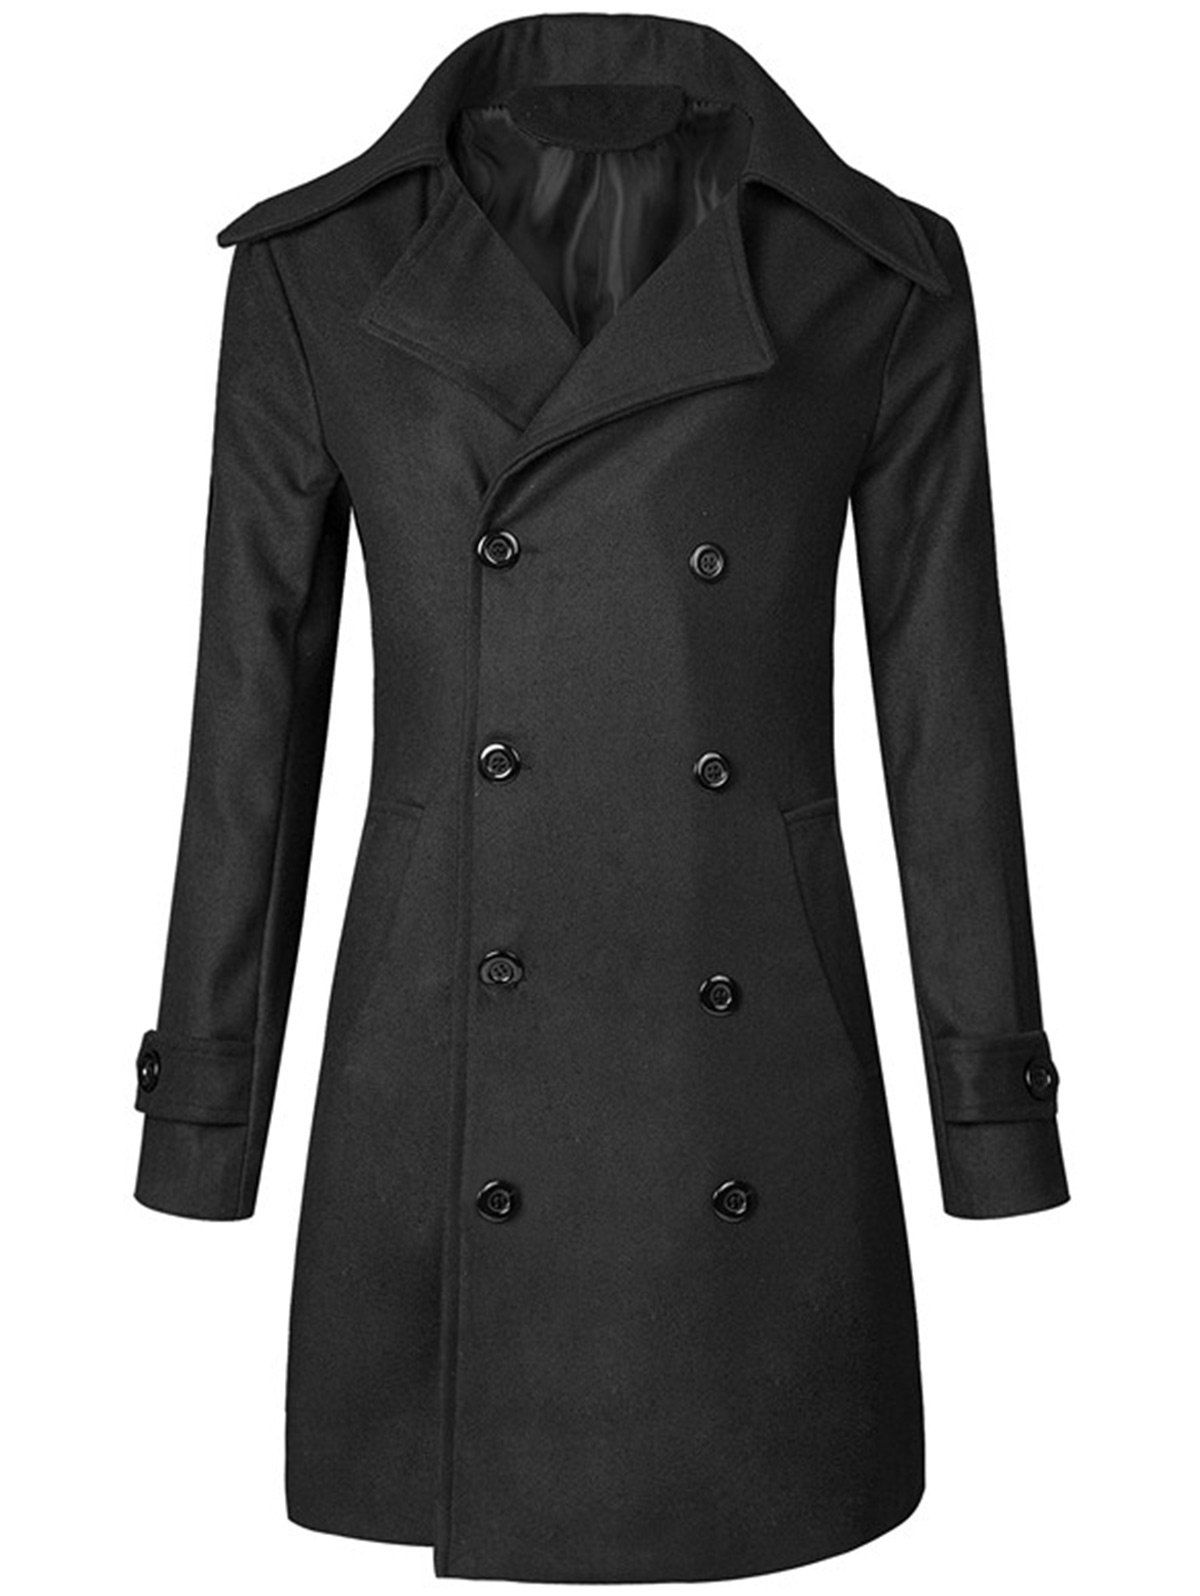 [26% OFF] Wide Lapel Double Breasted Trench Coat | Rosegal